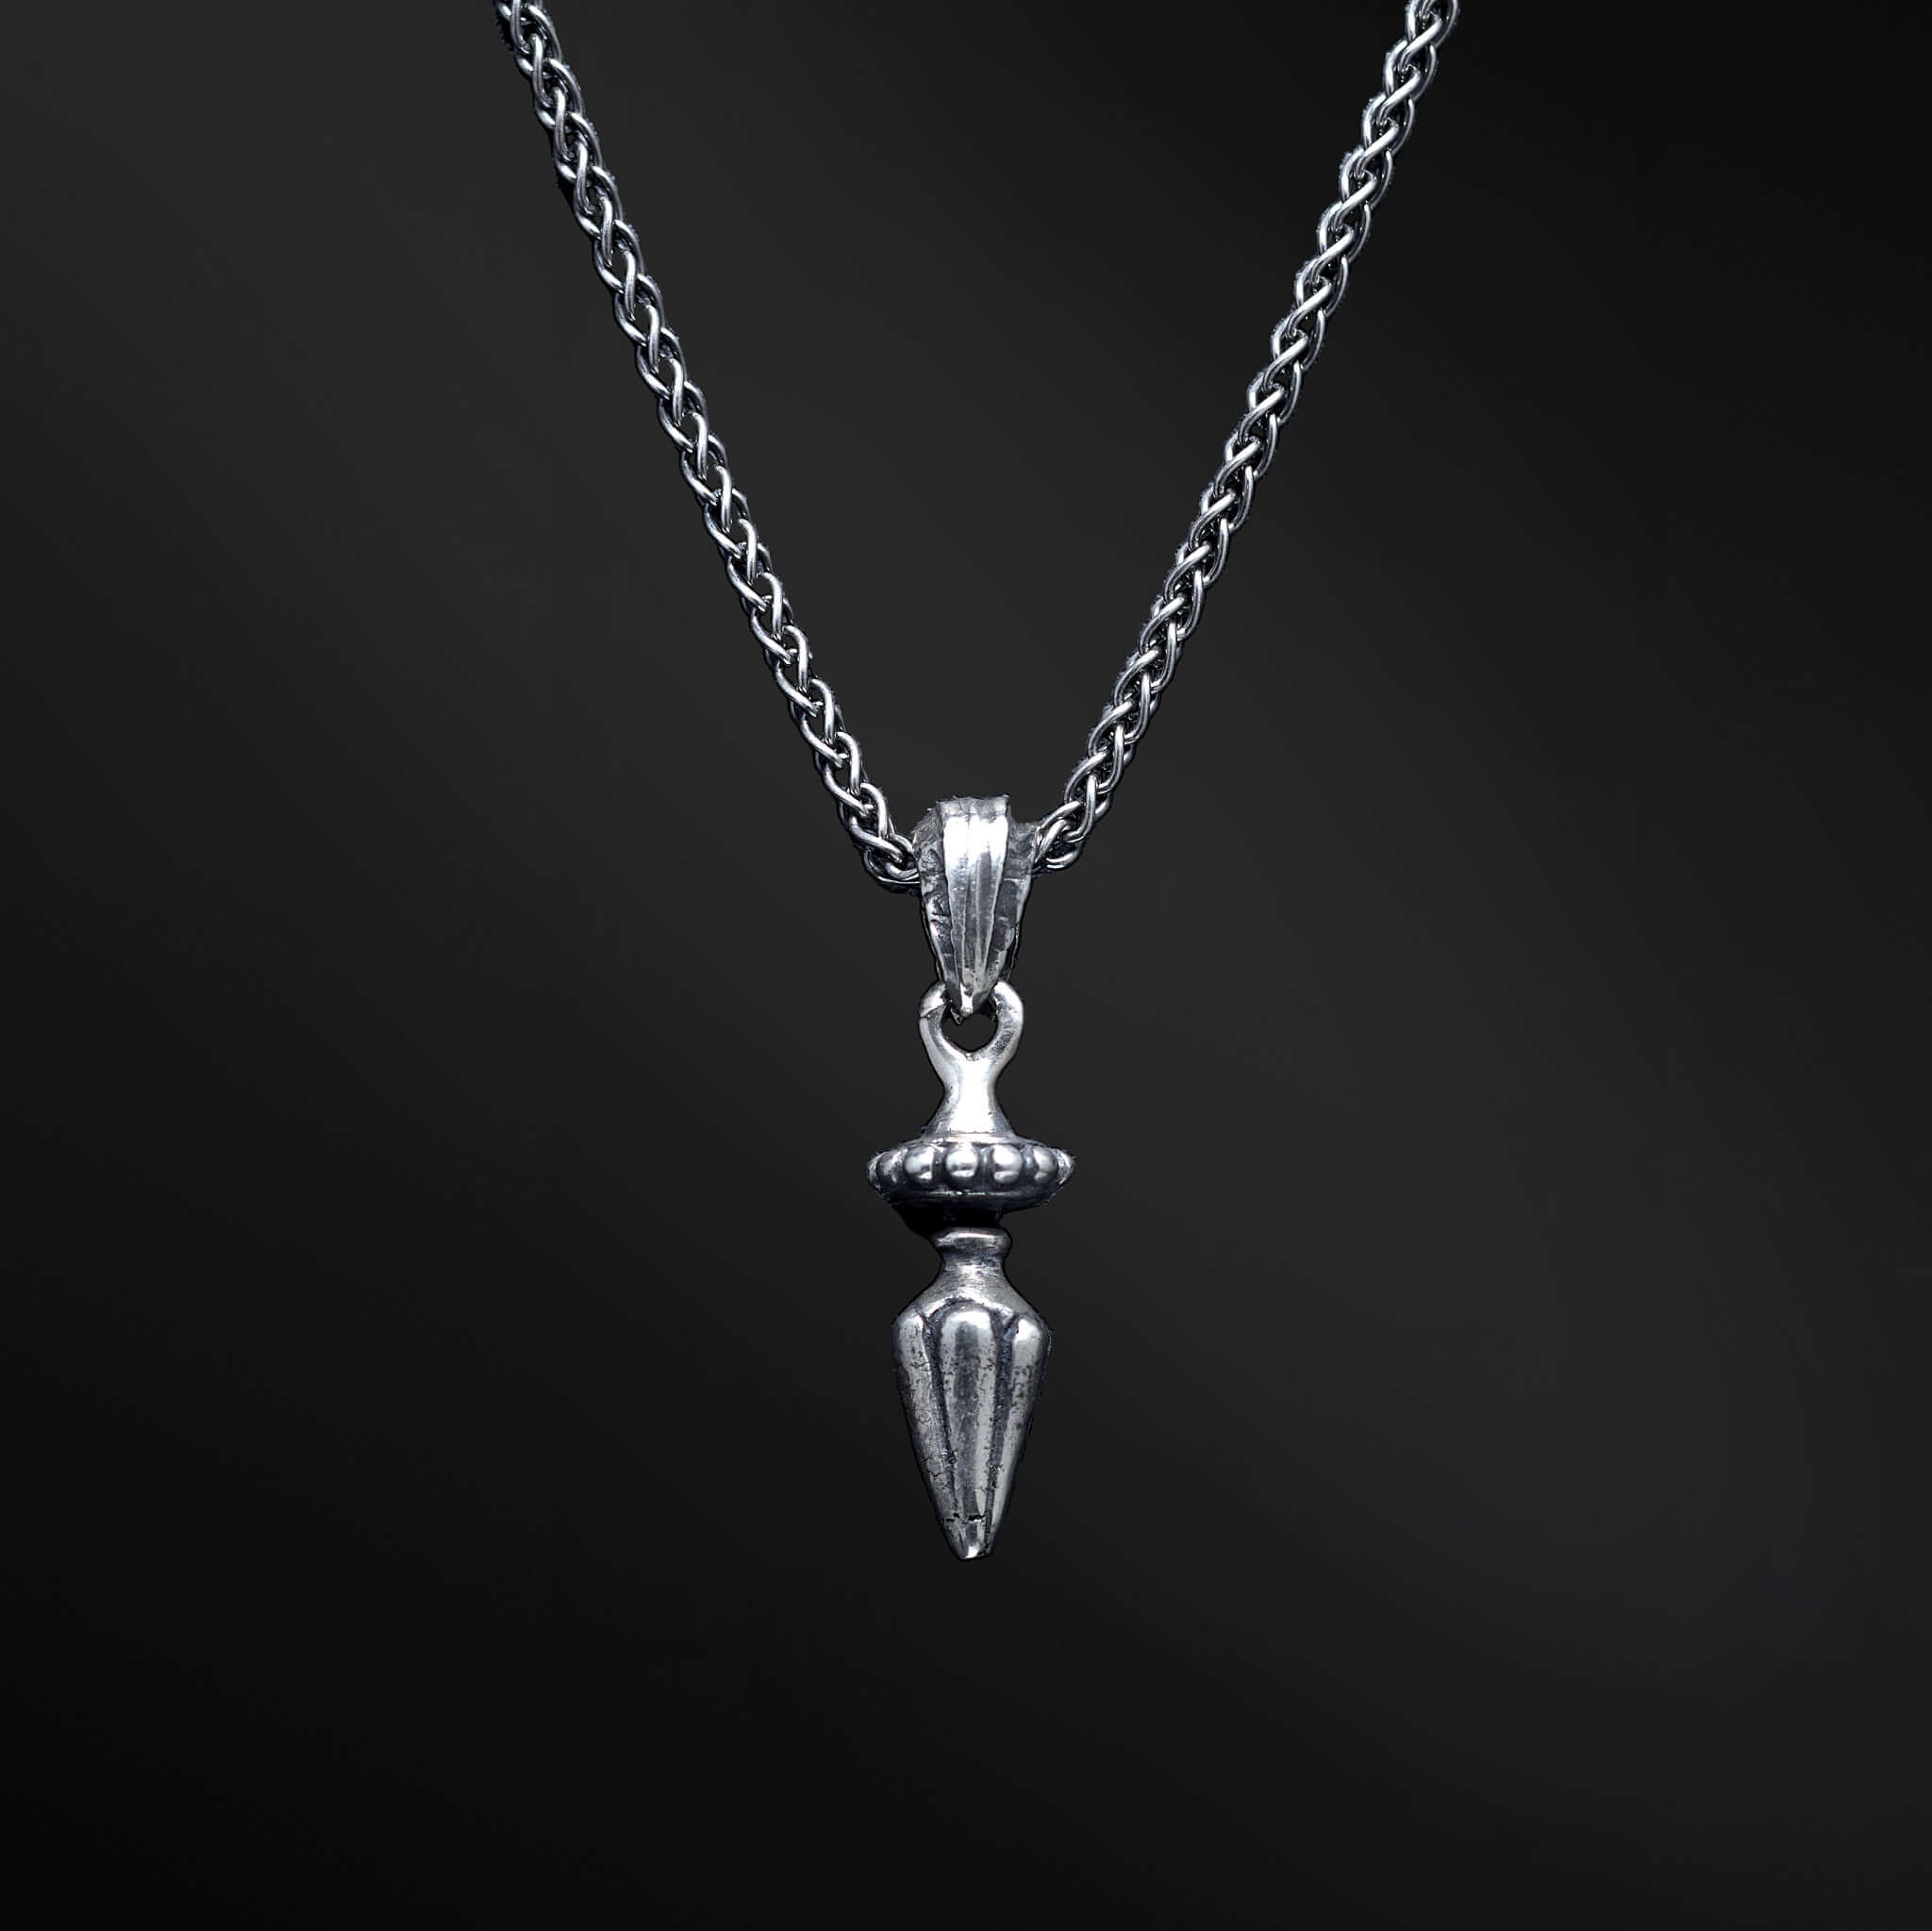 &quot;David Sword Pendant: An image capturing the embodiment of inner strength in the David Sword pendant. Crafted with finesse, this sleek pendant takes the form of a powerful sword. Its elegant design beautifully encapsulates the essence of courage and determination. When worn, it serves as a symbolic reminder of resilience and fearlessness, inspiring you to confront challenges head-on. Let this pendant empower and embolden your spirit.&quot;